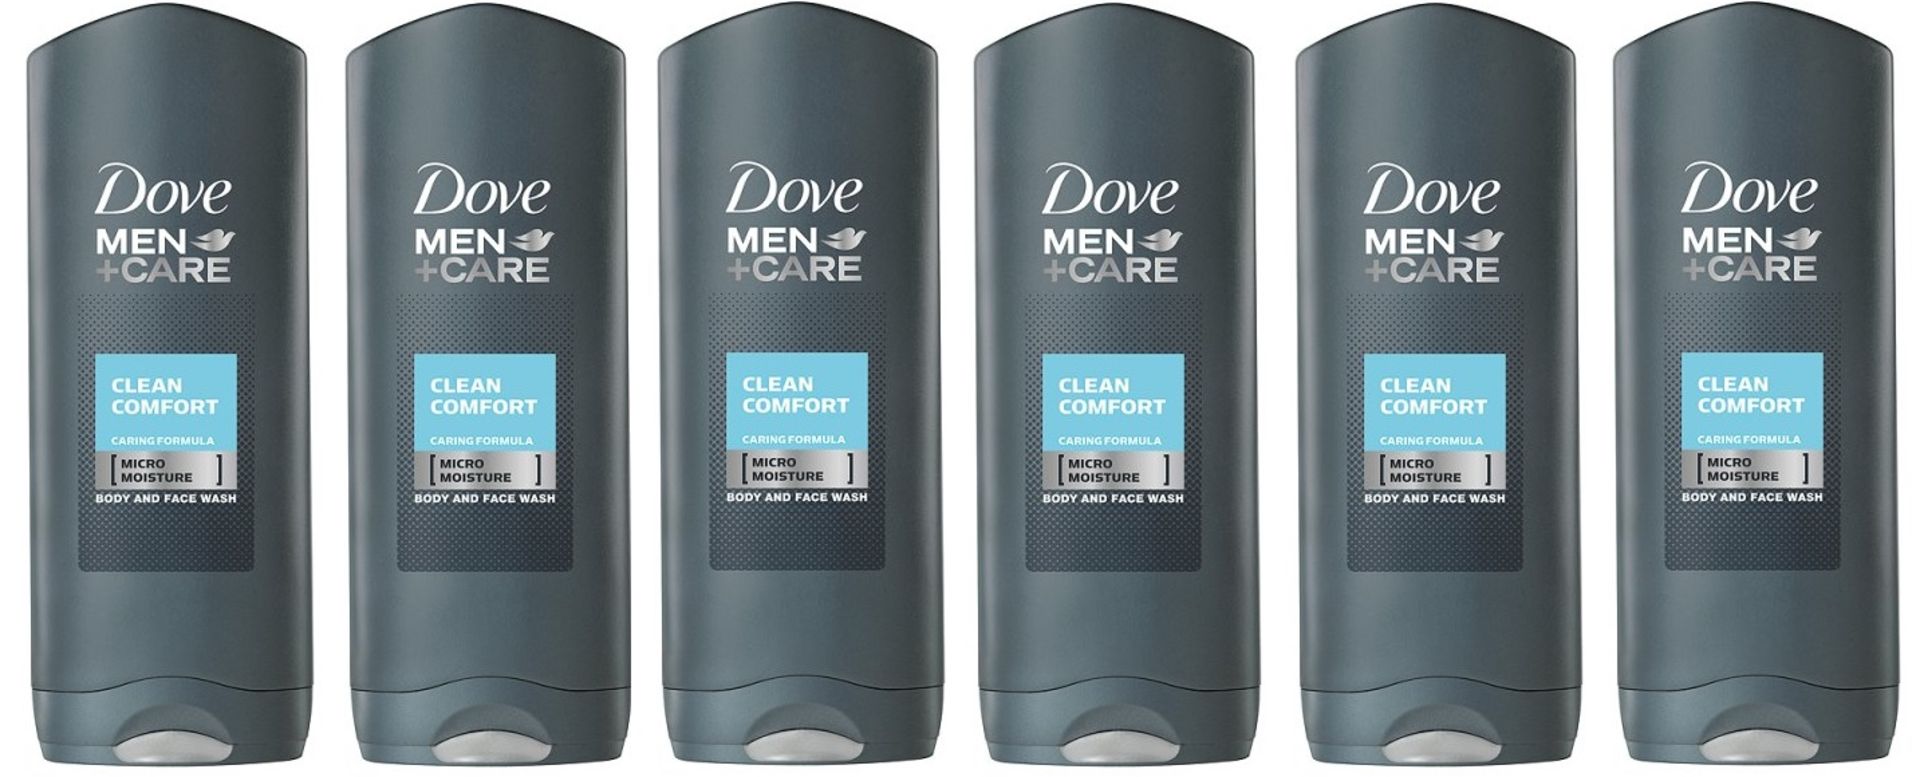 V Brand New Six Bottles 250ML Dove Men + Care Body And Fash Wash - Clean Comfort